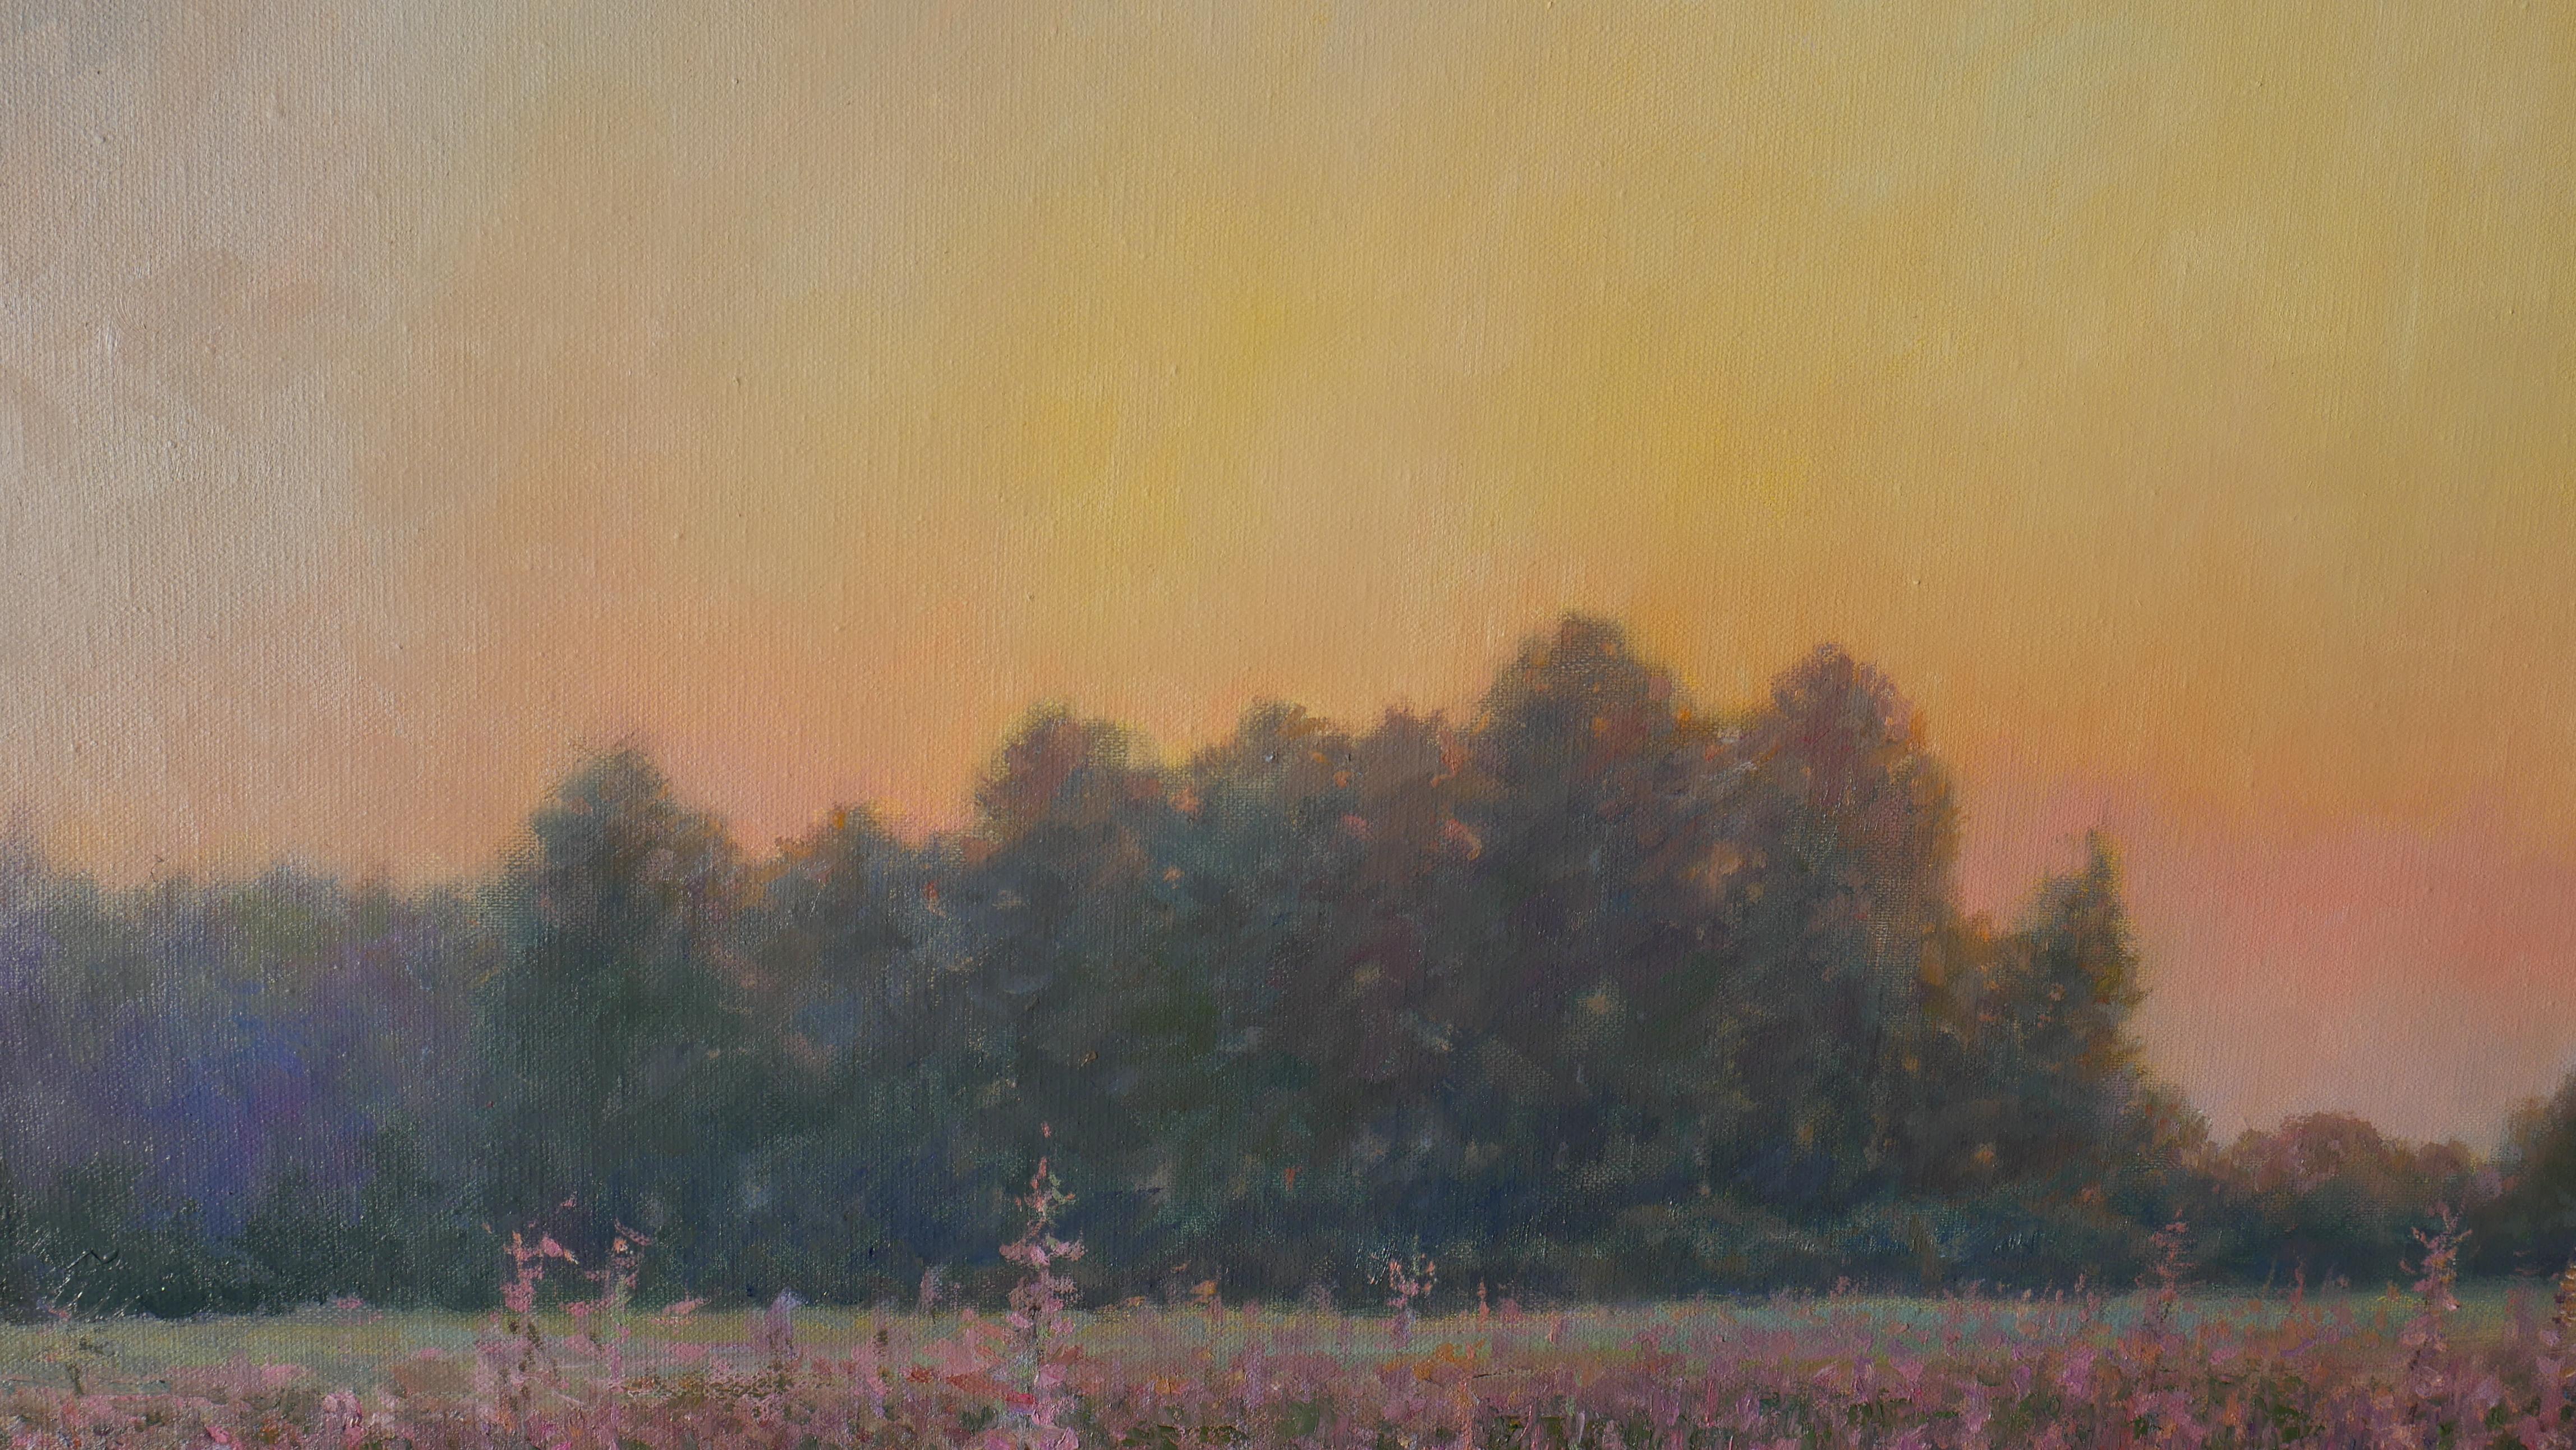 Sunset Over The Fireweed Field - sunset landscape painting For Sale 2